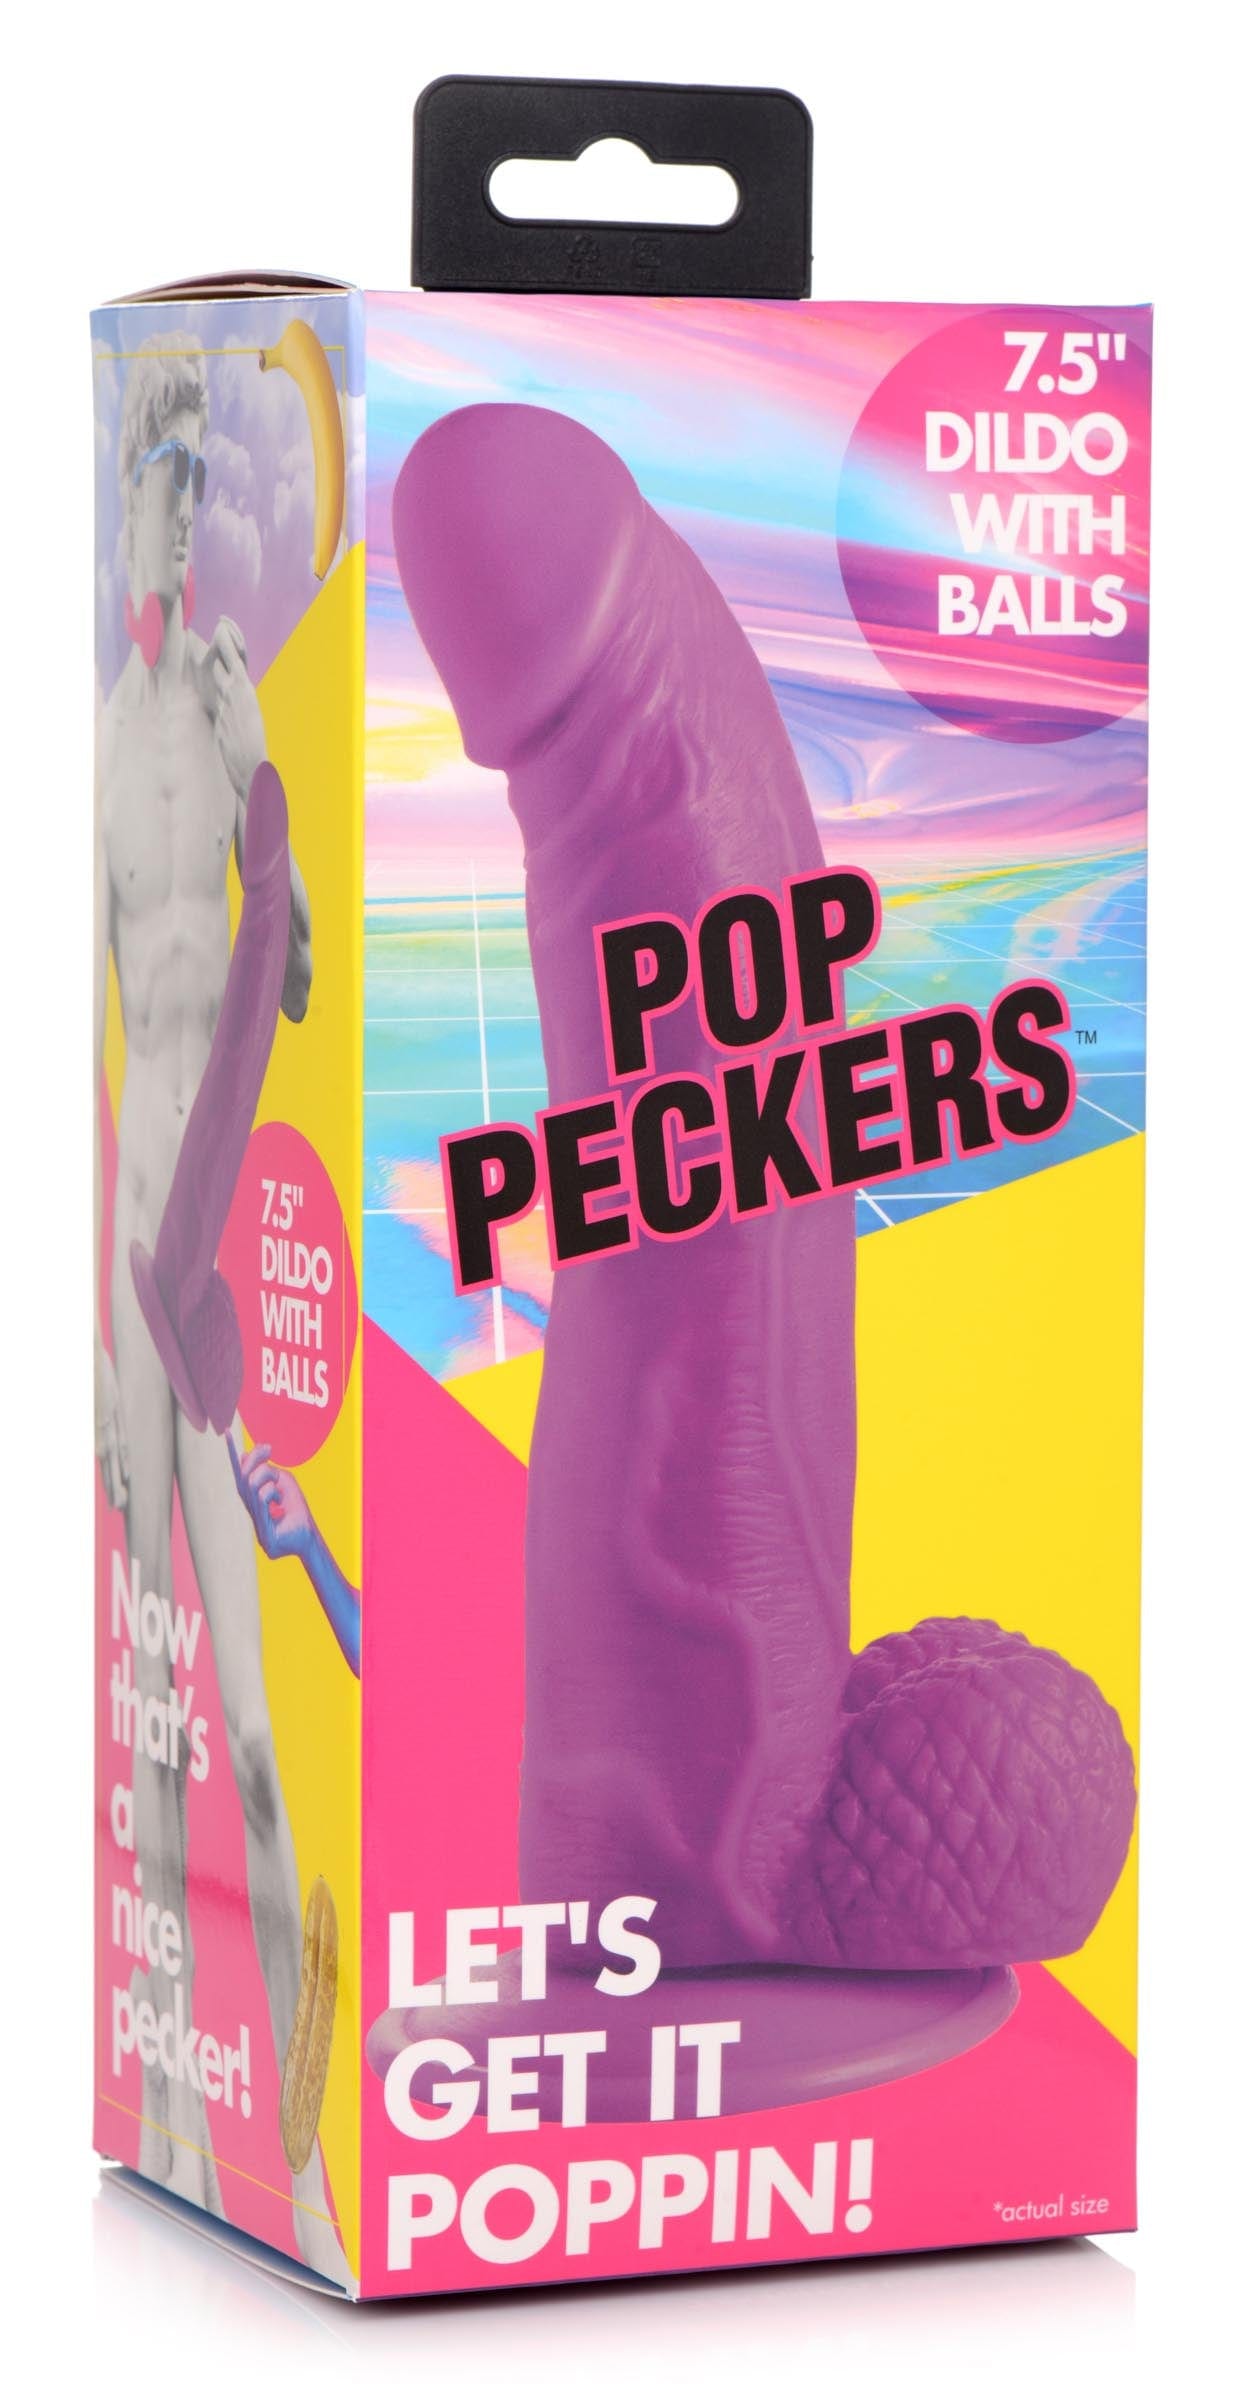 Pop Peckers Realistic Dildo Purple Pop Peckers 7.5" Dildo with Balls at the Haus of Shag